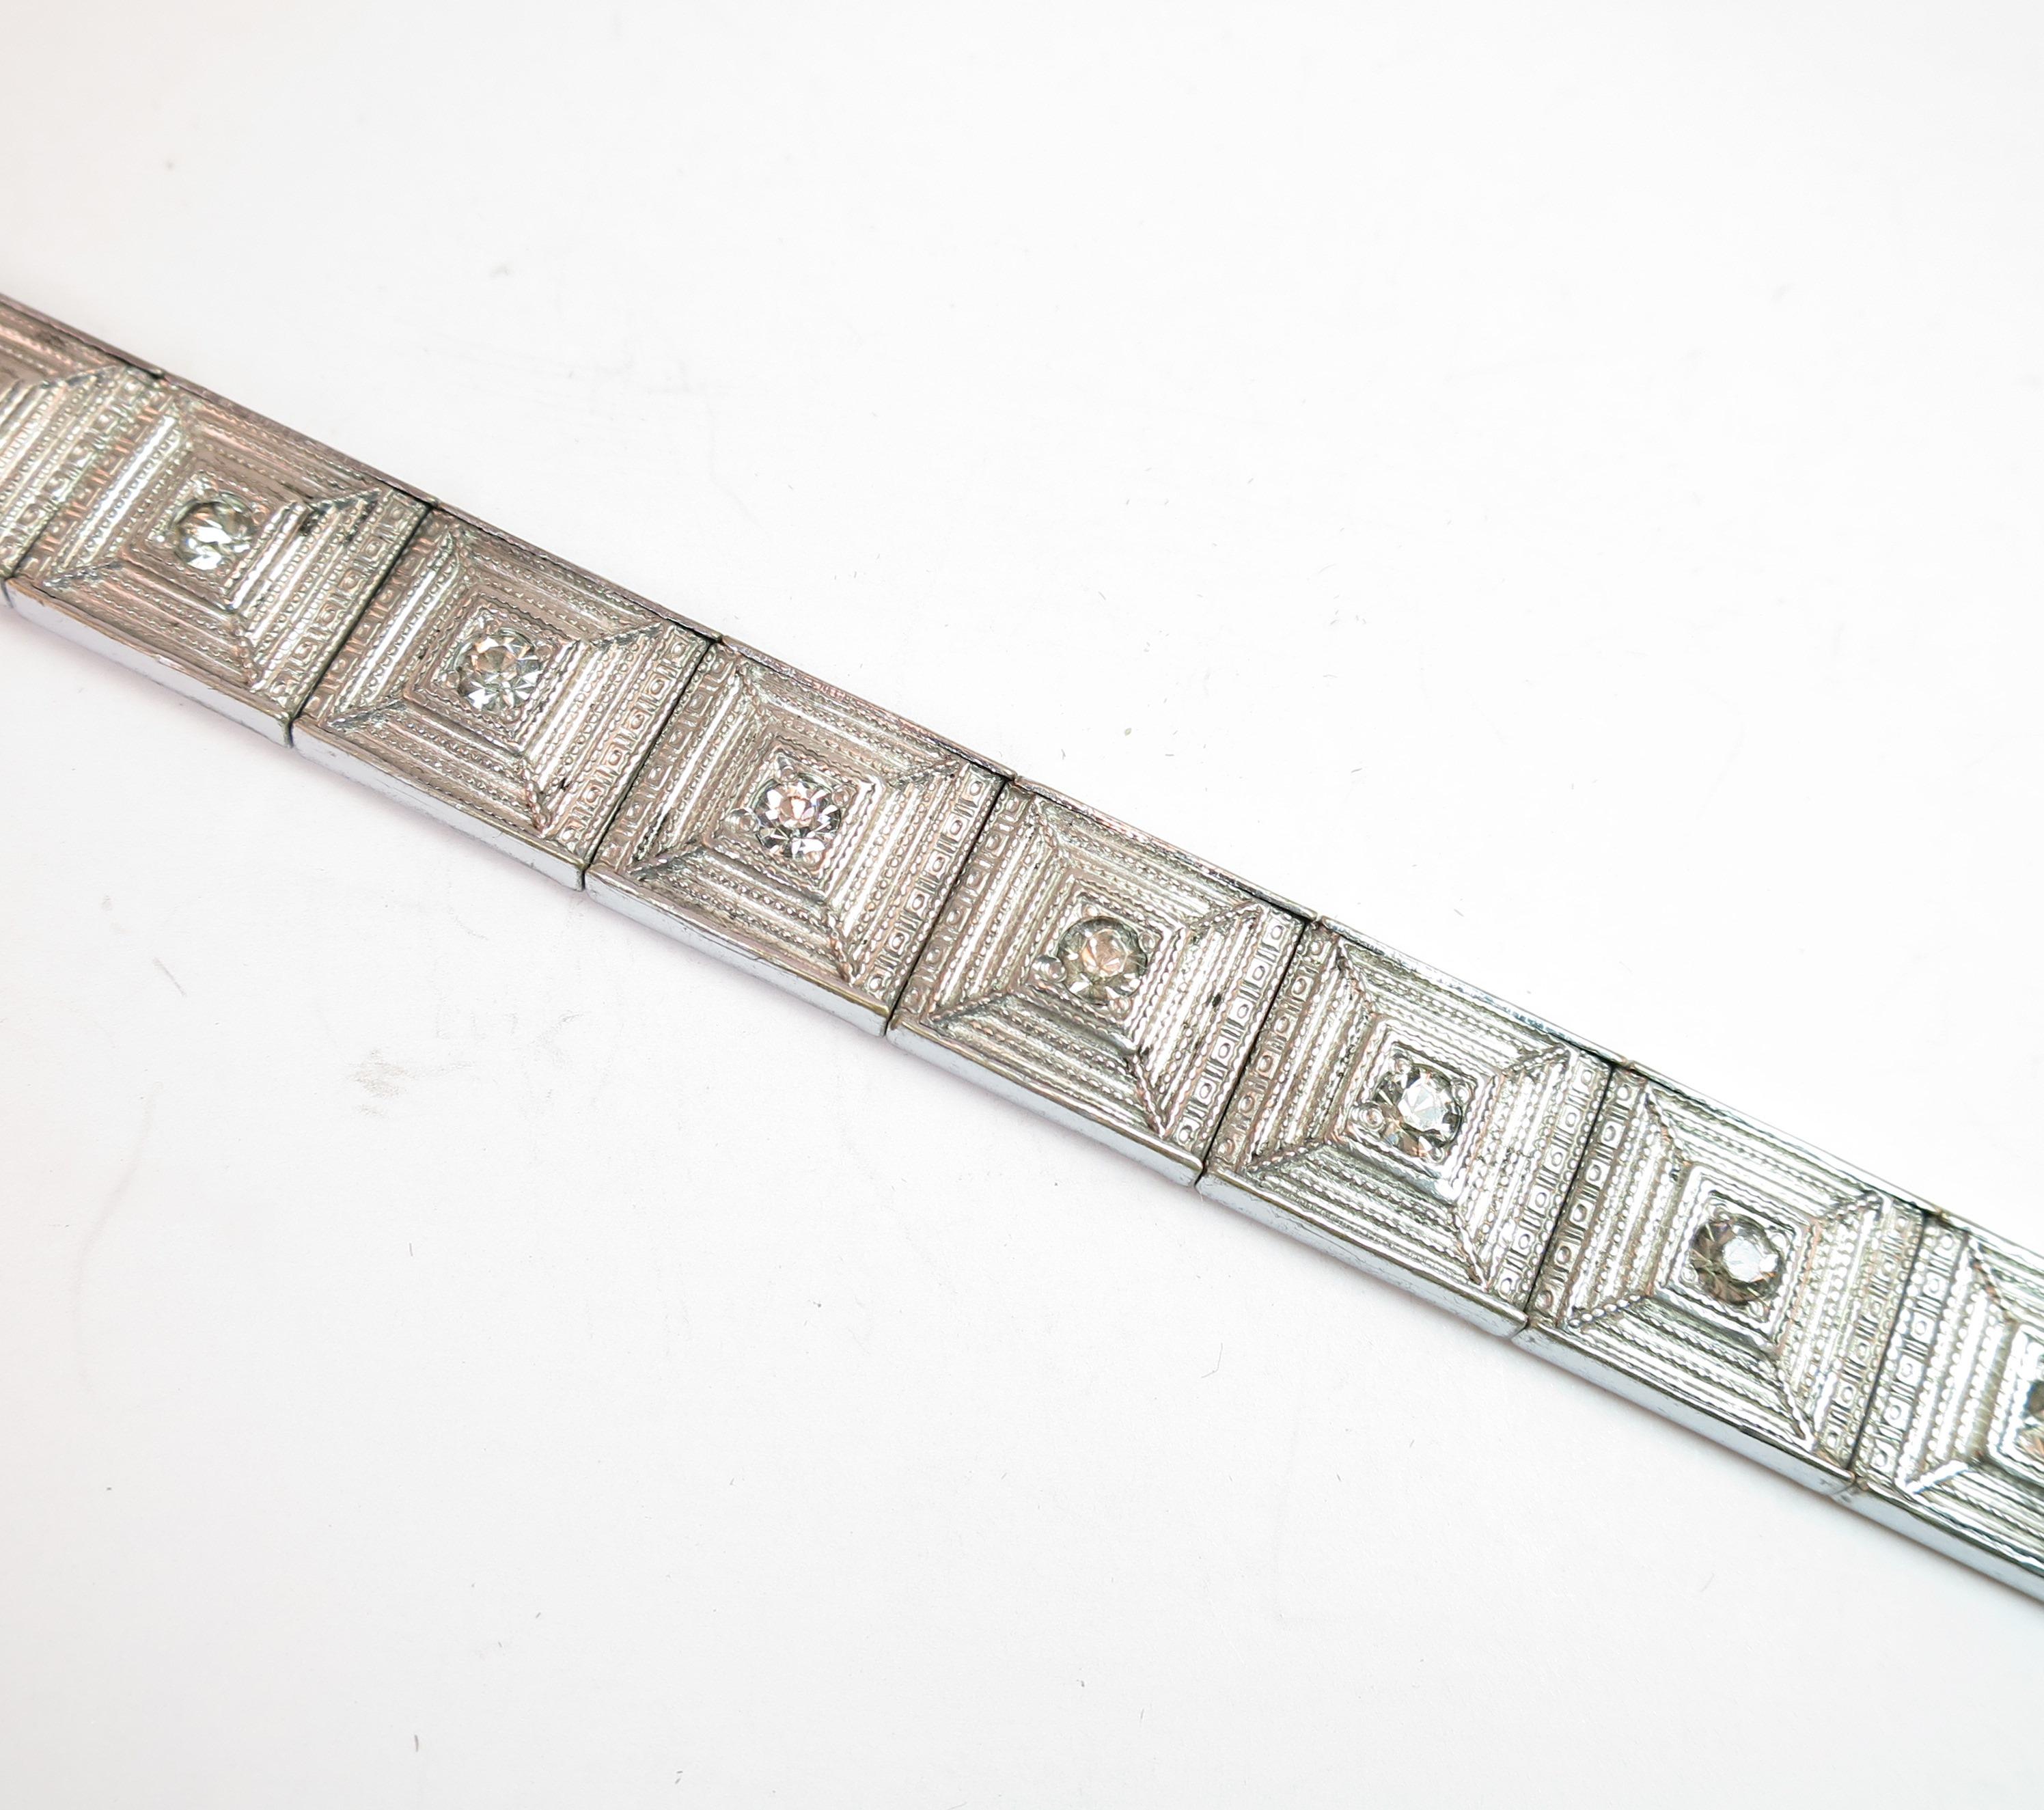 Offered here is ALLCO Art Deco rhodium-plated link bracelet created by the A.L. Lindroth Company of North Attleboro, Mass. in the 1920s. Tightly-linked square platforms are etched with a slightly pyramidal concentric design flanked by bands in a